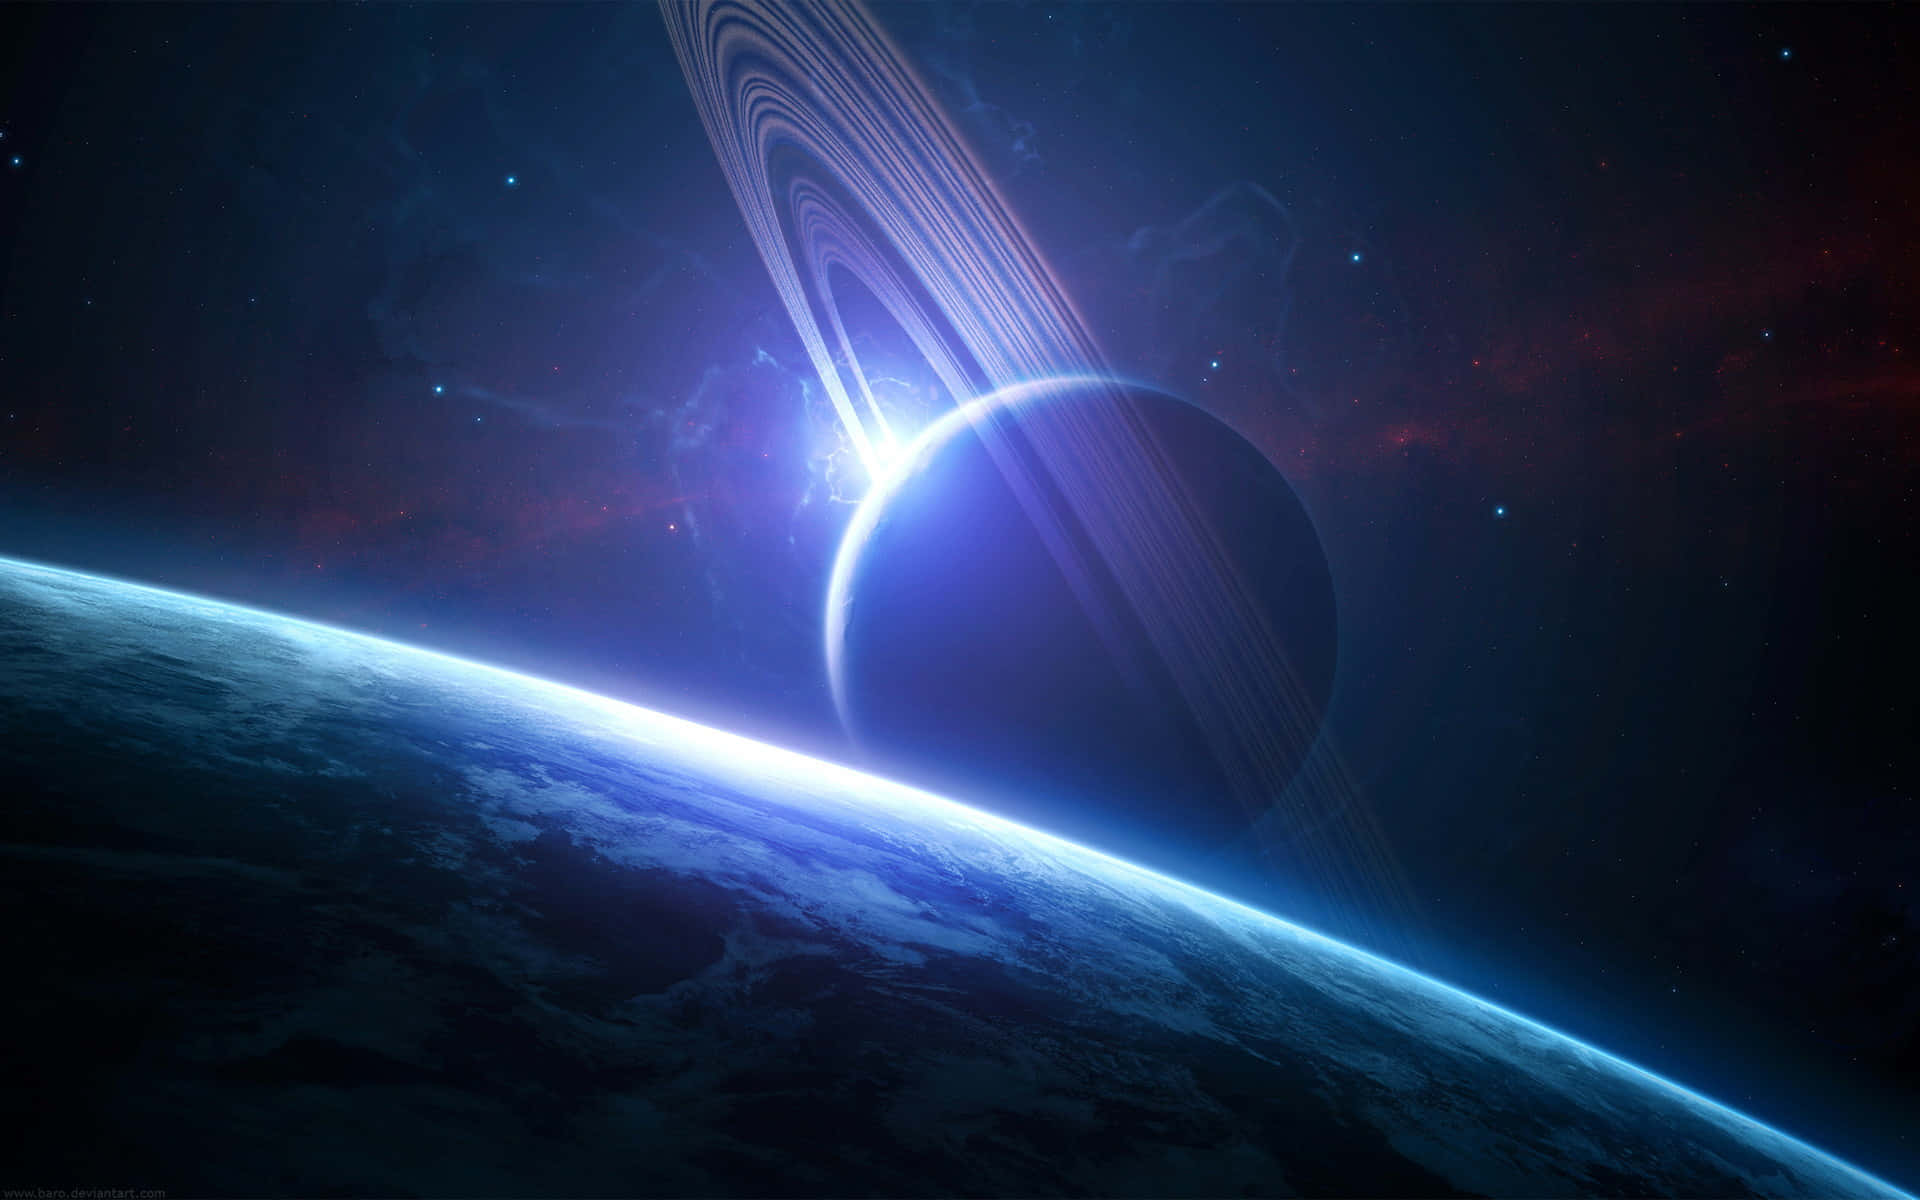 Samsung Dex With A Ringed Planet Wallpaper